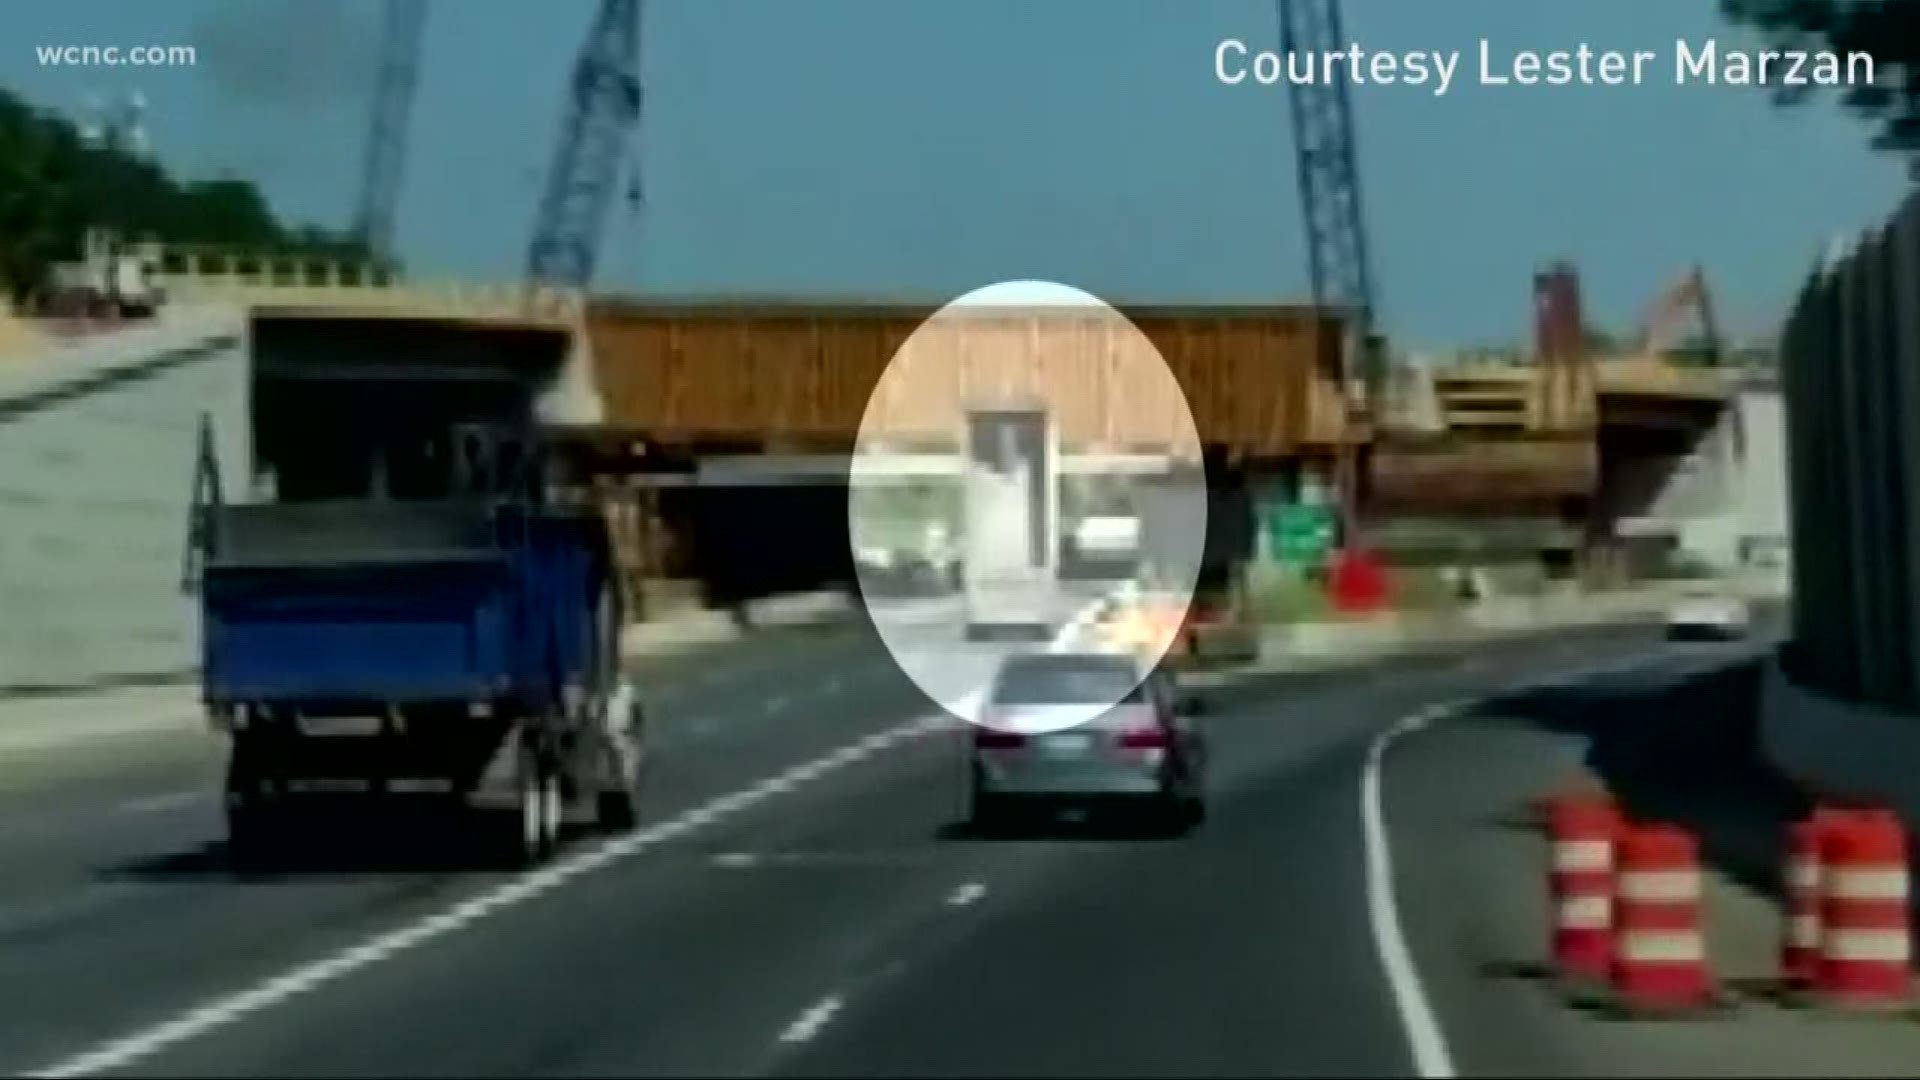 Cell phone video captured the moment when a dump truck woking on the I-77 toll lane crashed into an overpass under construction.